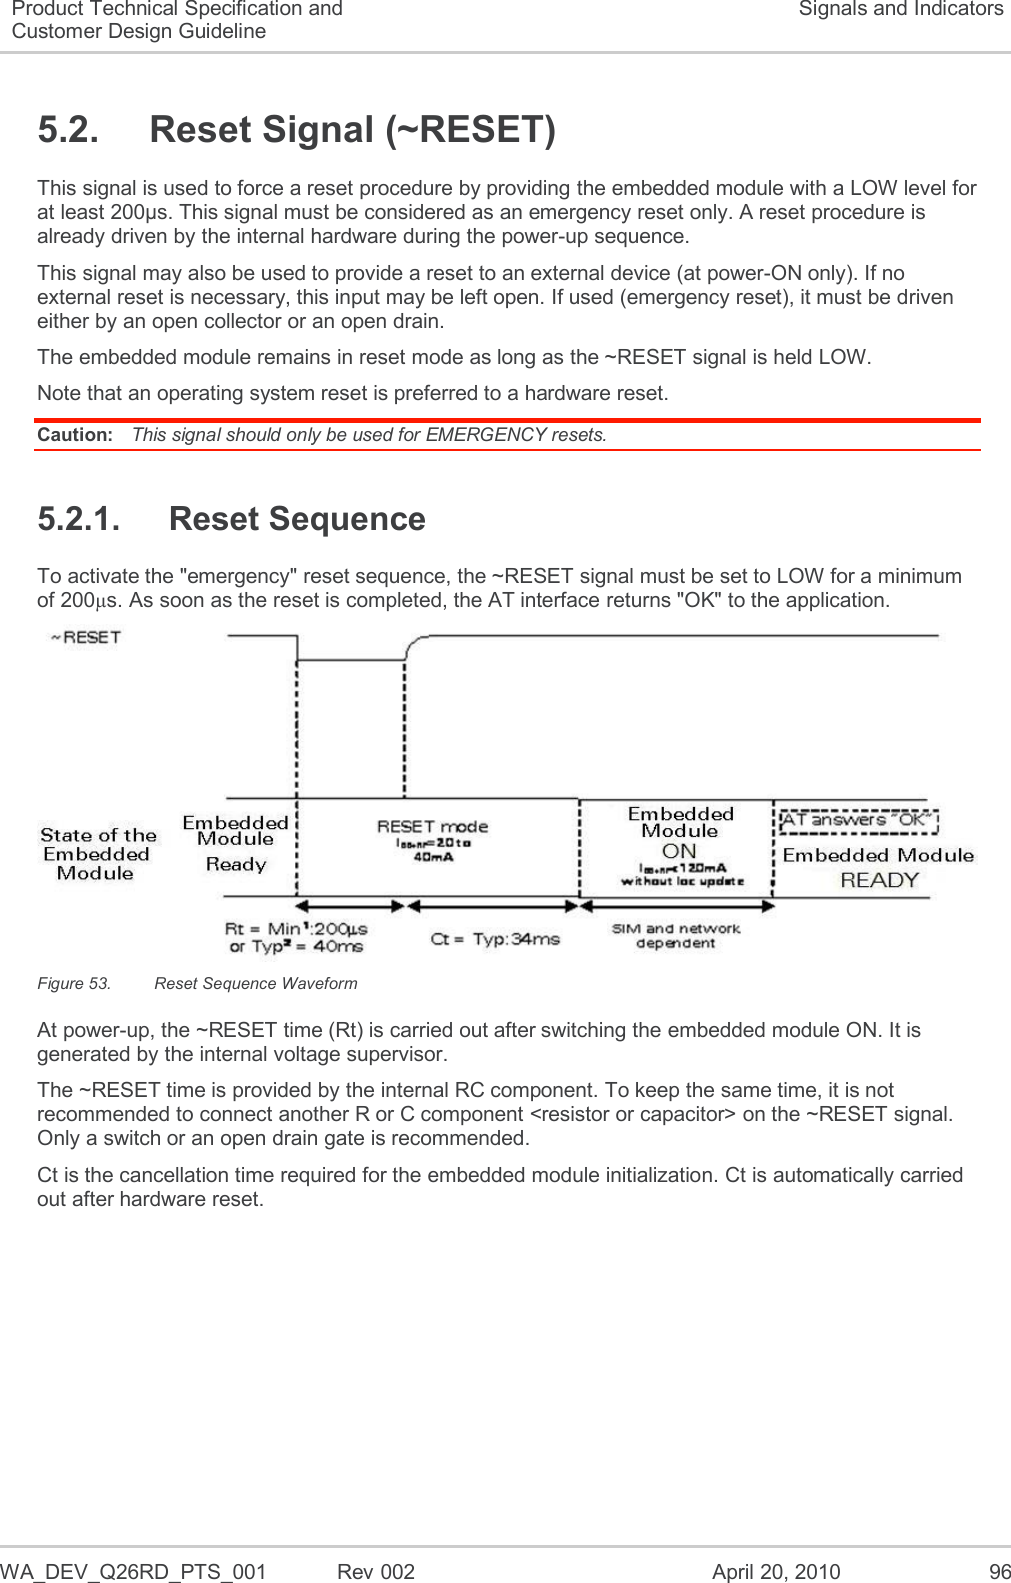   WA_DEV_Q26RD_PTS_001  Rev 002  April 20, 2010 96 Product Technical Specification and Customer Design Guideline Signals and Indicators 5.2.  Reset Signal (~RESET) This signal is used to force a reset procedure by providing the embedded module with a LOW level for at least 200µs. This signal must be considered as an emergency reset only. A reset procedure is already driven by the internal hardware during the power-up sequence. This signal may also be used to provide a reset to an external device (at power-ON only). If no external reset is necessary, this input may be left open. If used (emergency reset), it must be driven either by an open collector or an open drain. The embedded module remains in reset mode as long as the ~RESET signal is held LOW. Note that an operating system reset is preferred to a hardware reset. Caution:  This signal should only be used for EMERGENCY resets. 5.2.1.  Reset Sequence To activate the &quot;emergency&quot; reset sequence, the ~RESET signal must be set to LOW for a minimum of 200µs. As soon as the reset is completed, the AT interface returns &quot;OK&quot; to the application.  Figure 53.  Reset Sequence Waveform At power-up, the ~RESET time (Rt) is carried out after switching the embedded module ON. It is generated by the internal voltage supervisor. The ~RESET time is provided by the internal RC component. To keep the same time, it is not recommended to connect another R or C component &lt;resistor or capacitor&gt; on the ~RESET signal. Only a switch or an open drain gate is recommended. Ct is the cancellation time required for the embedded module initialization. Ct is automatically carried out after hardware reset. 